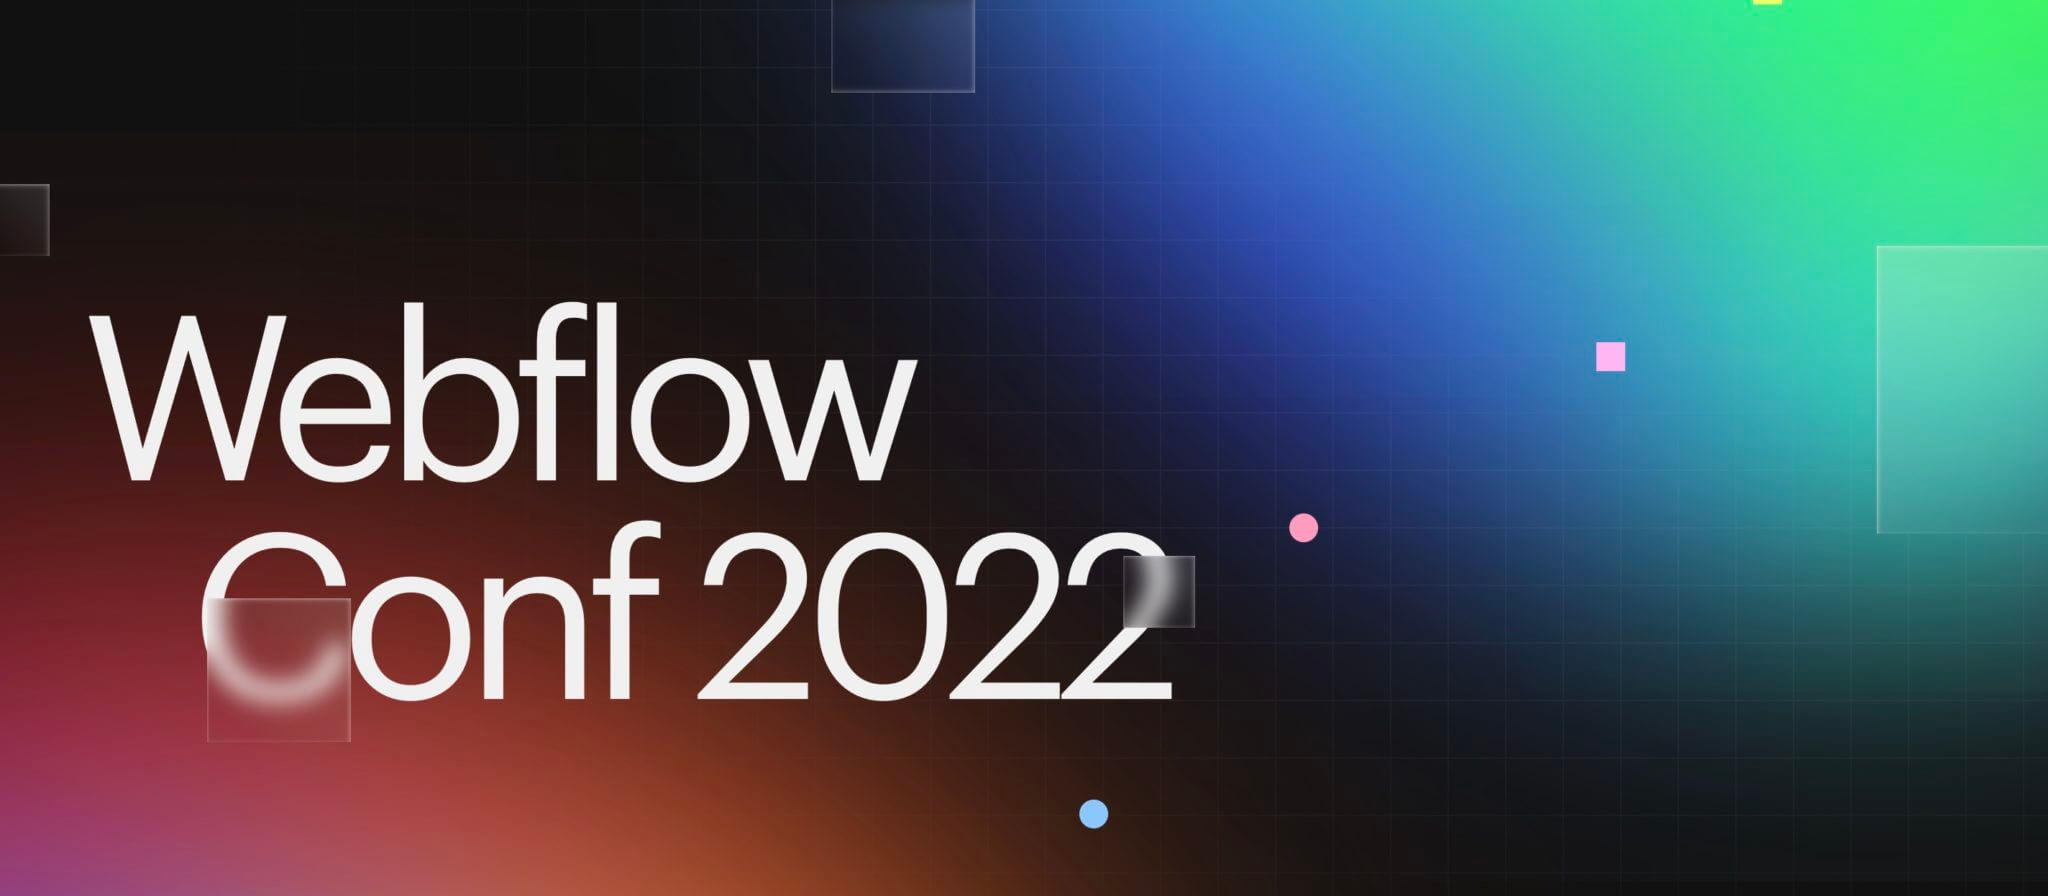 Webflow Conference 2022 banner